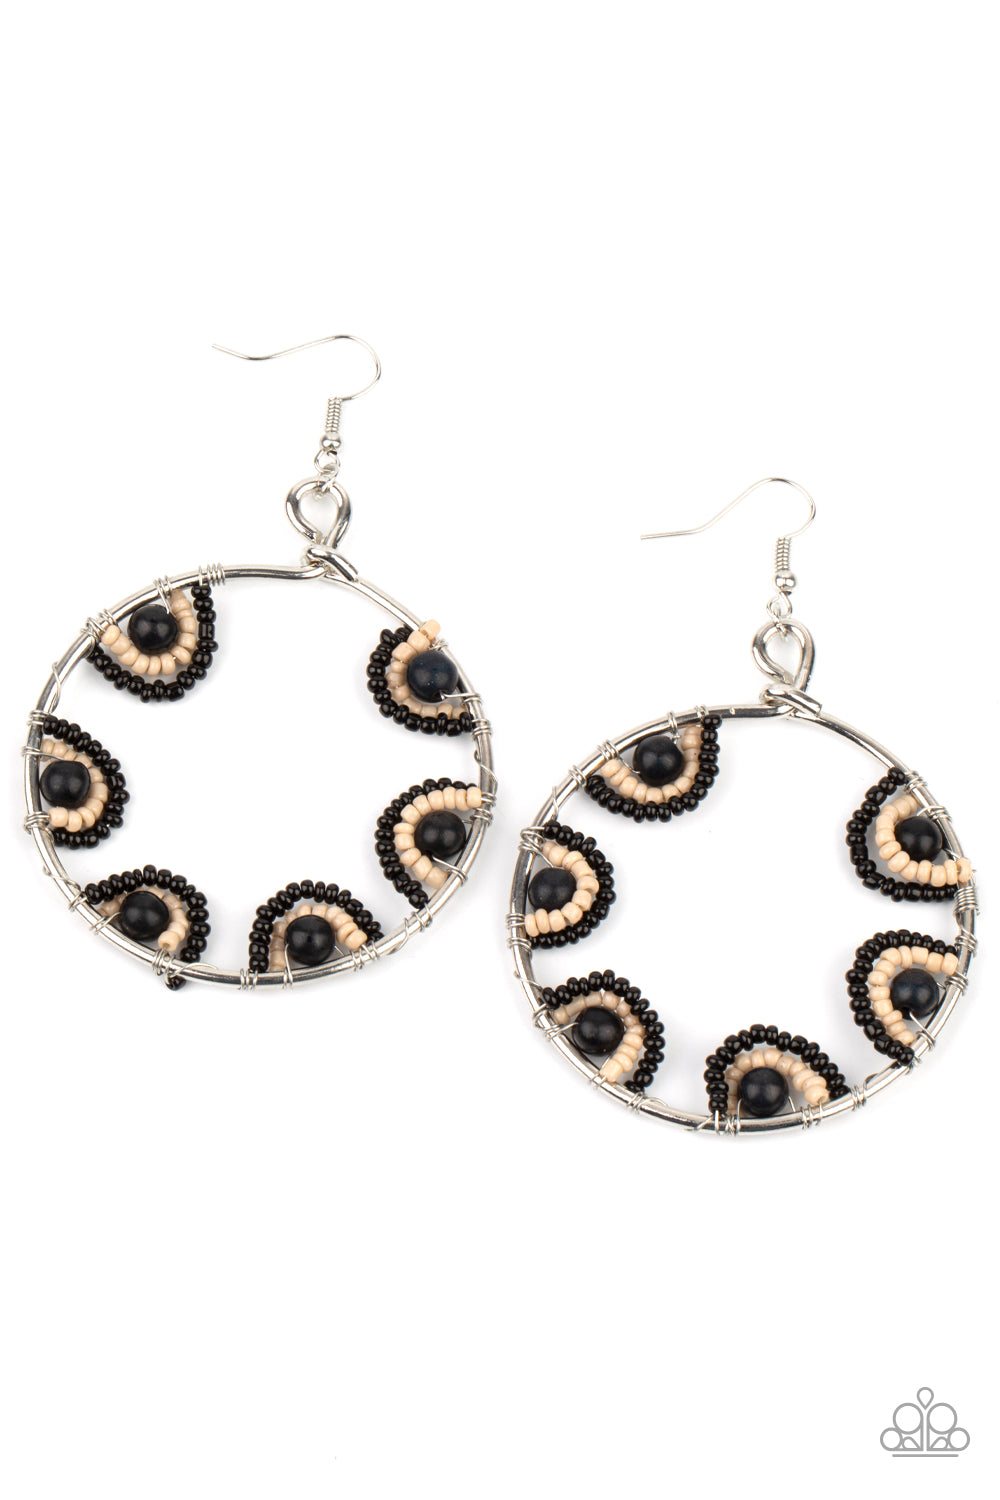 Paparazzi Off The Rim - Black Earrings - A Finishing Touch Jewelry